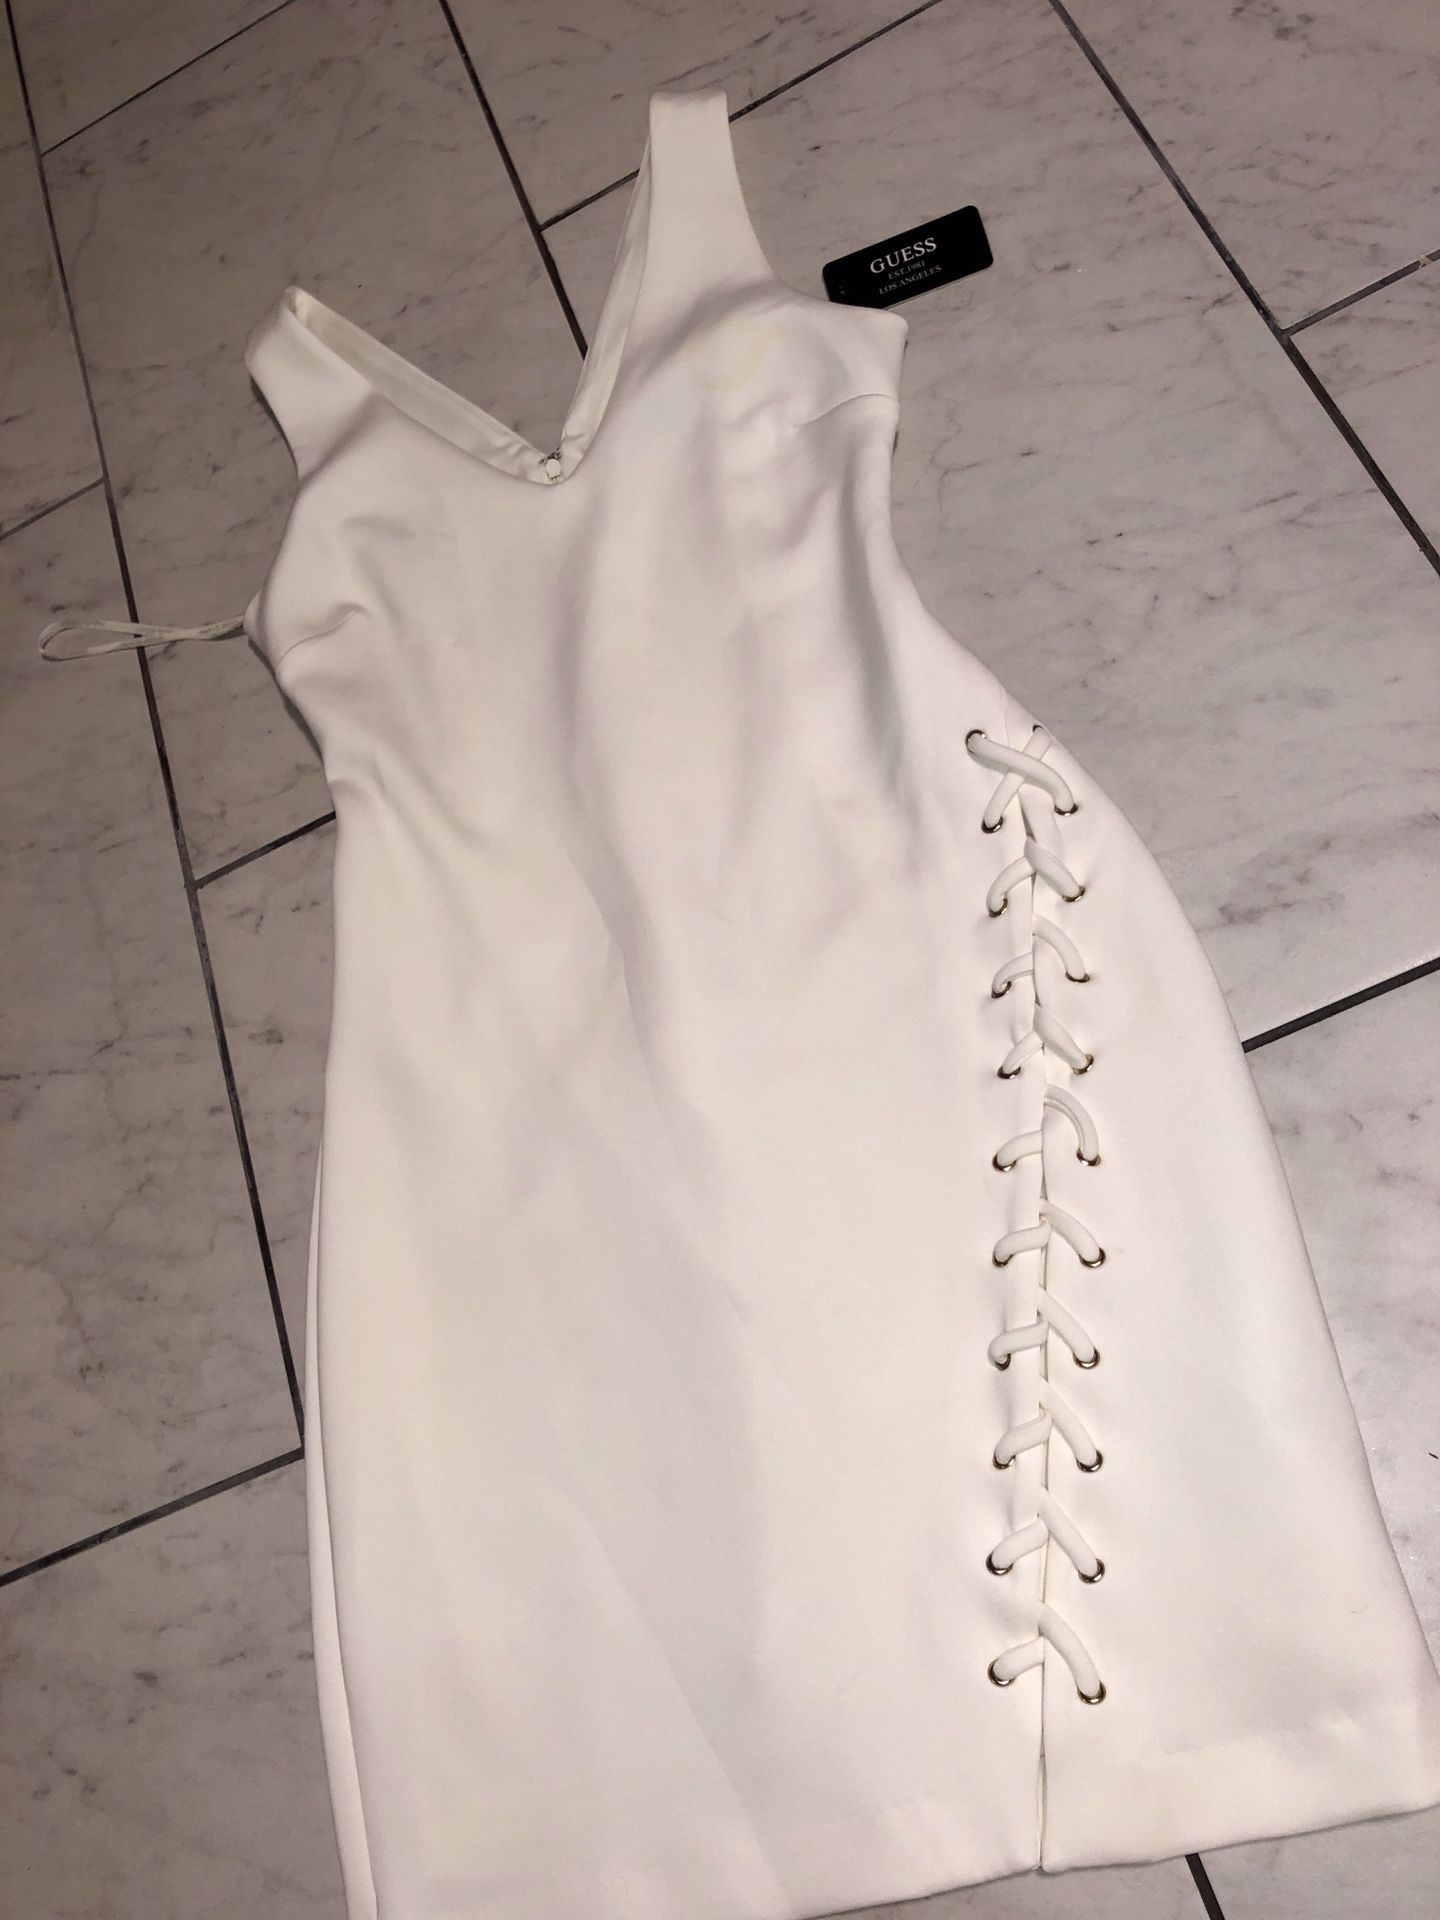 !MUST GO GIVE ME YOUR BEST OFFER! White dress BRAND NEW (GEUSS) size 6